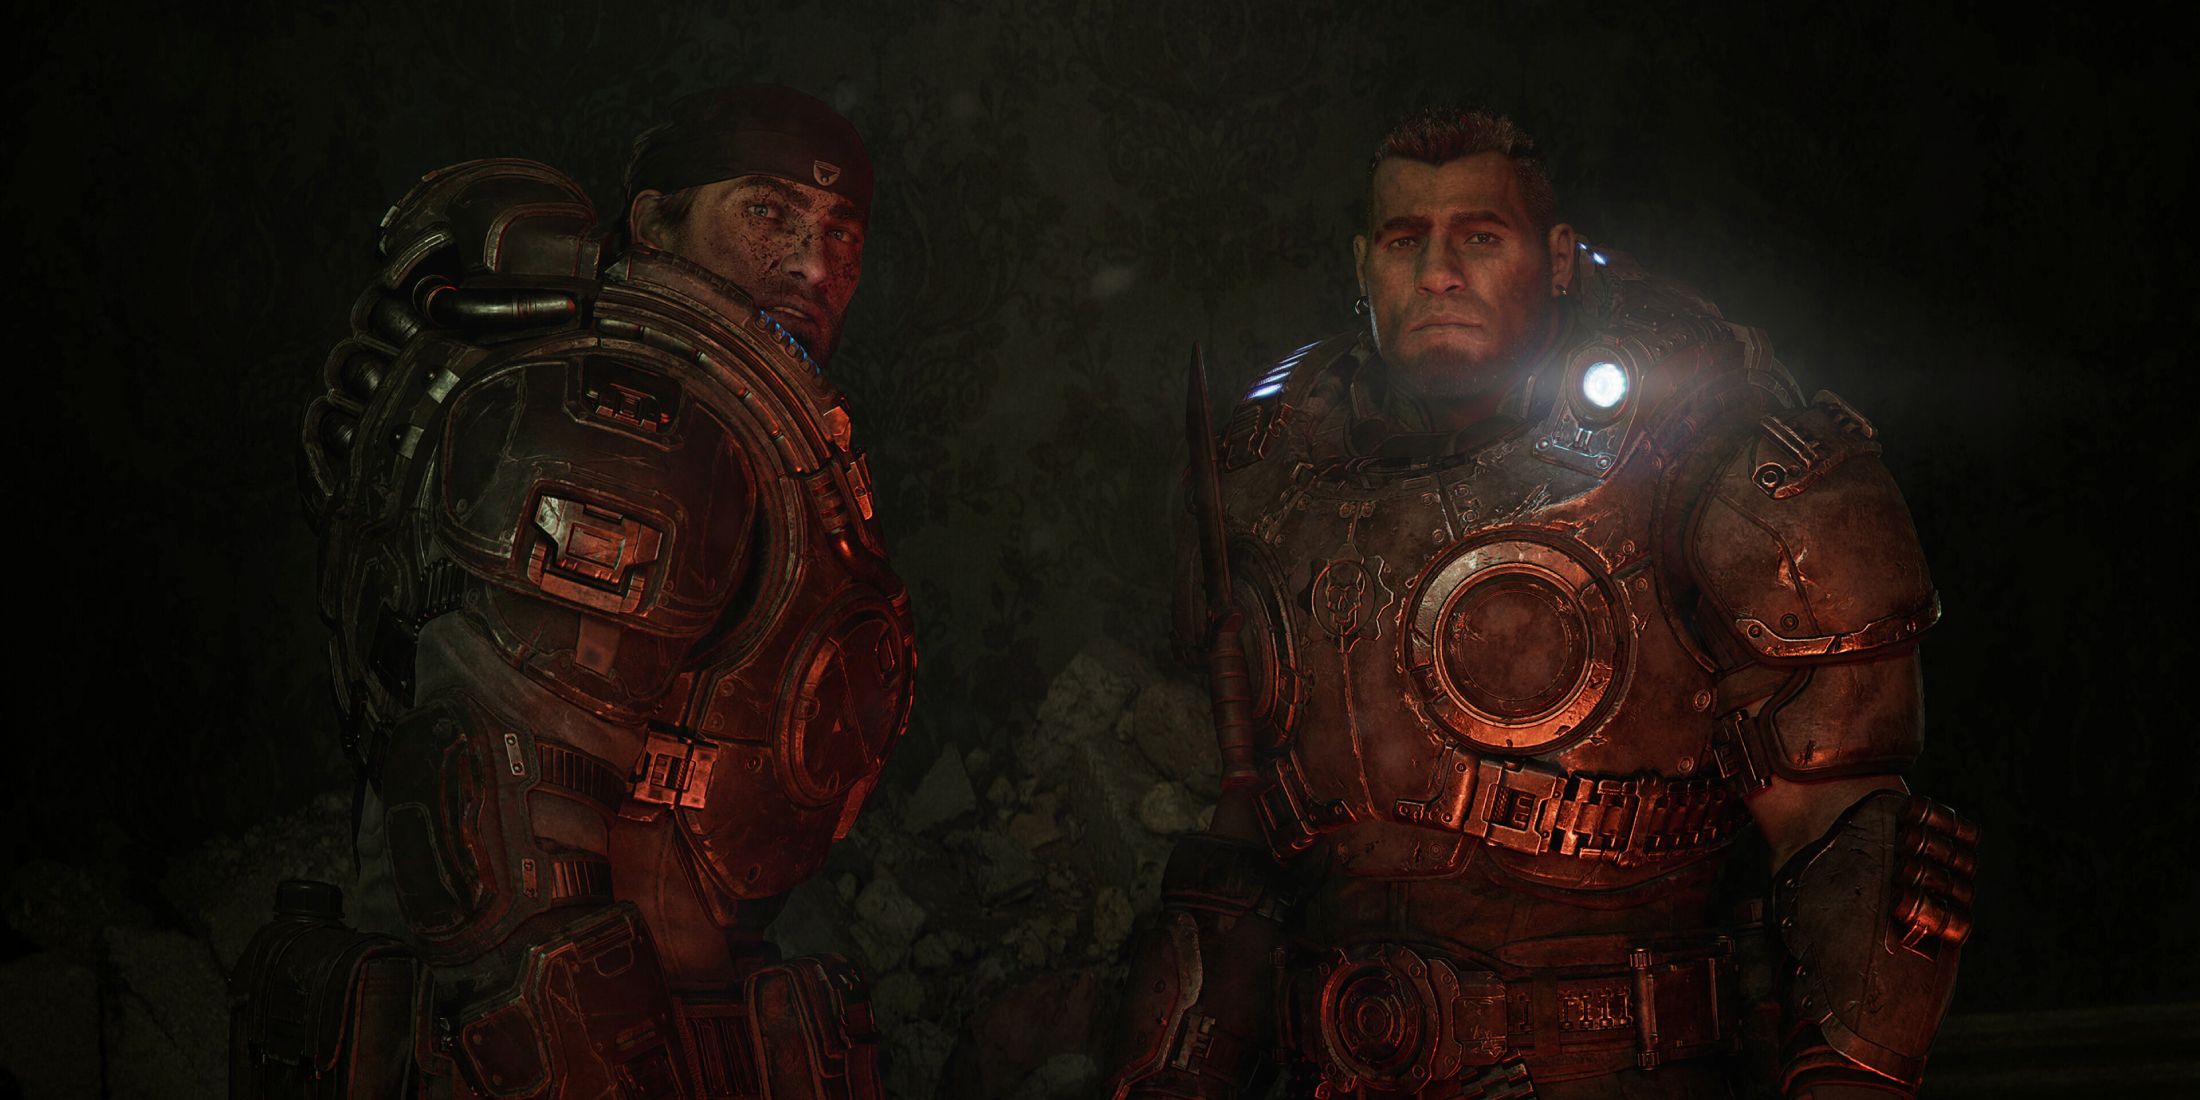 gears-of-war-e-day-multiplayer-confirmed